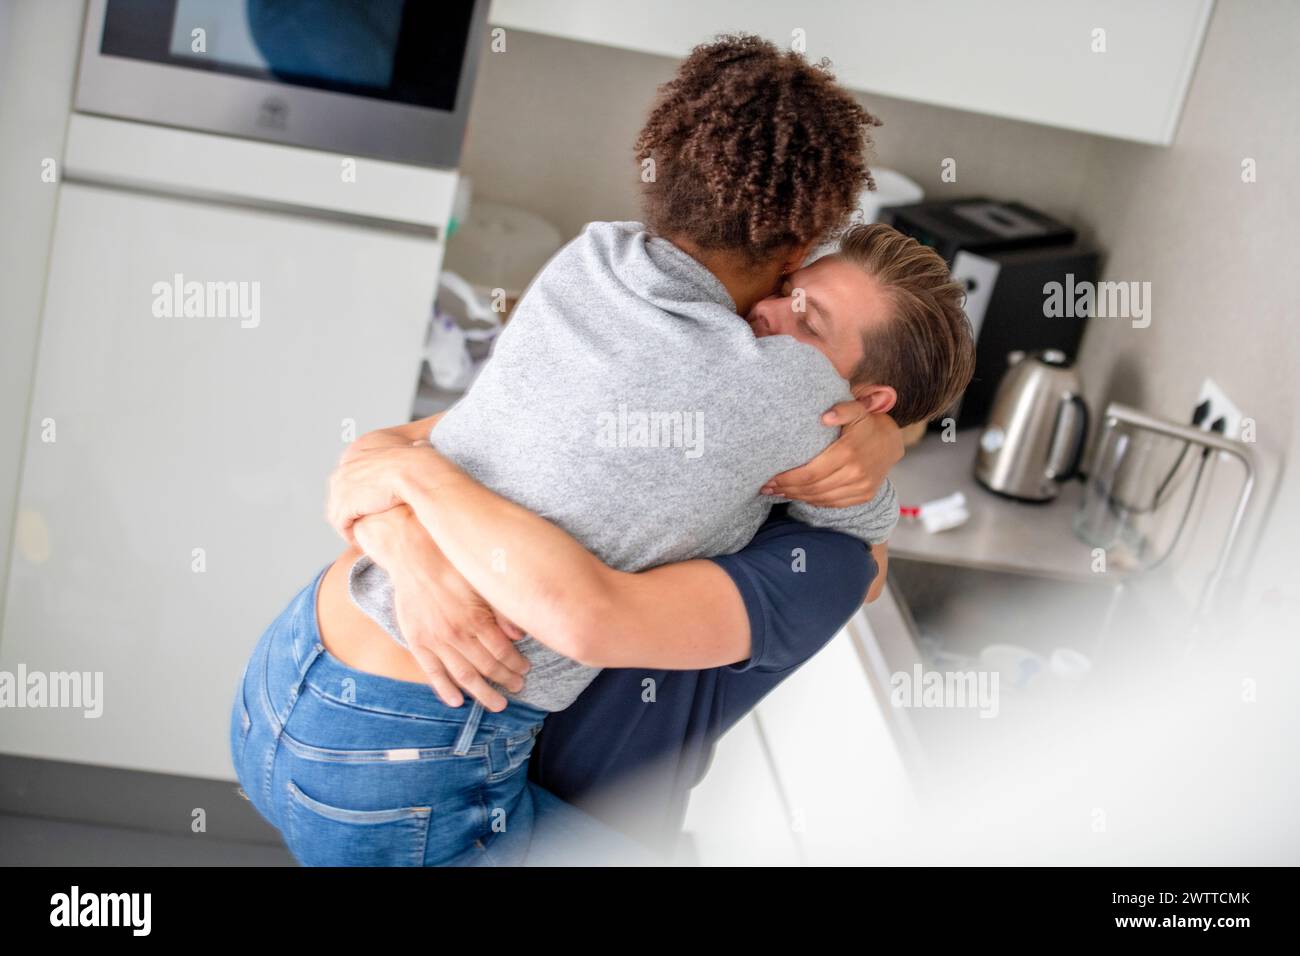 Warm embrace in a bright kitchen setting Stock Photo